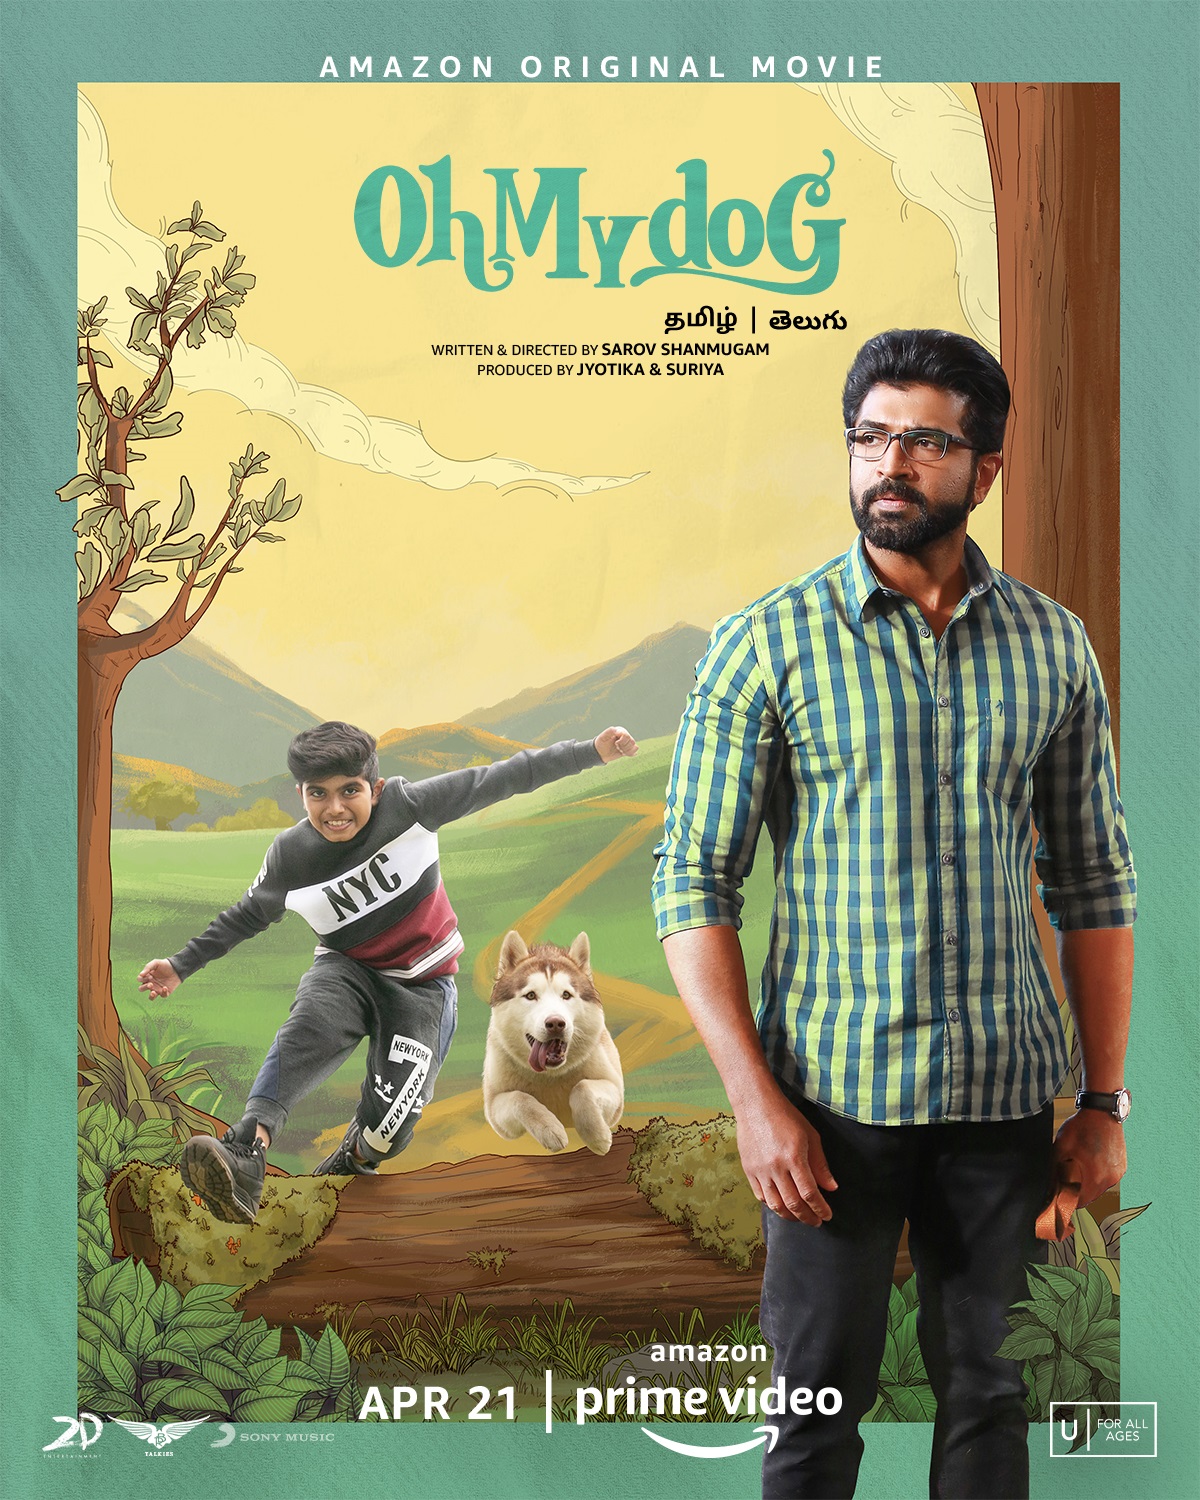 Oh My Dog will release on April 21